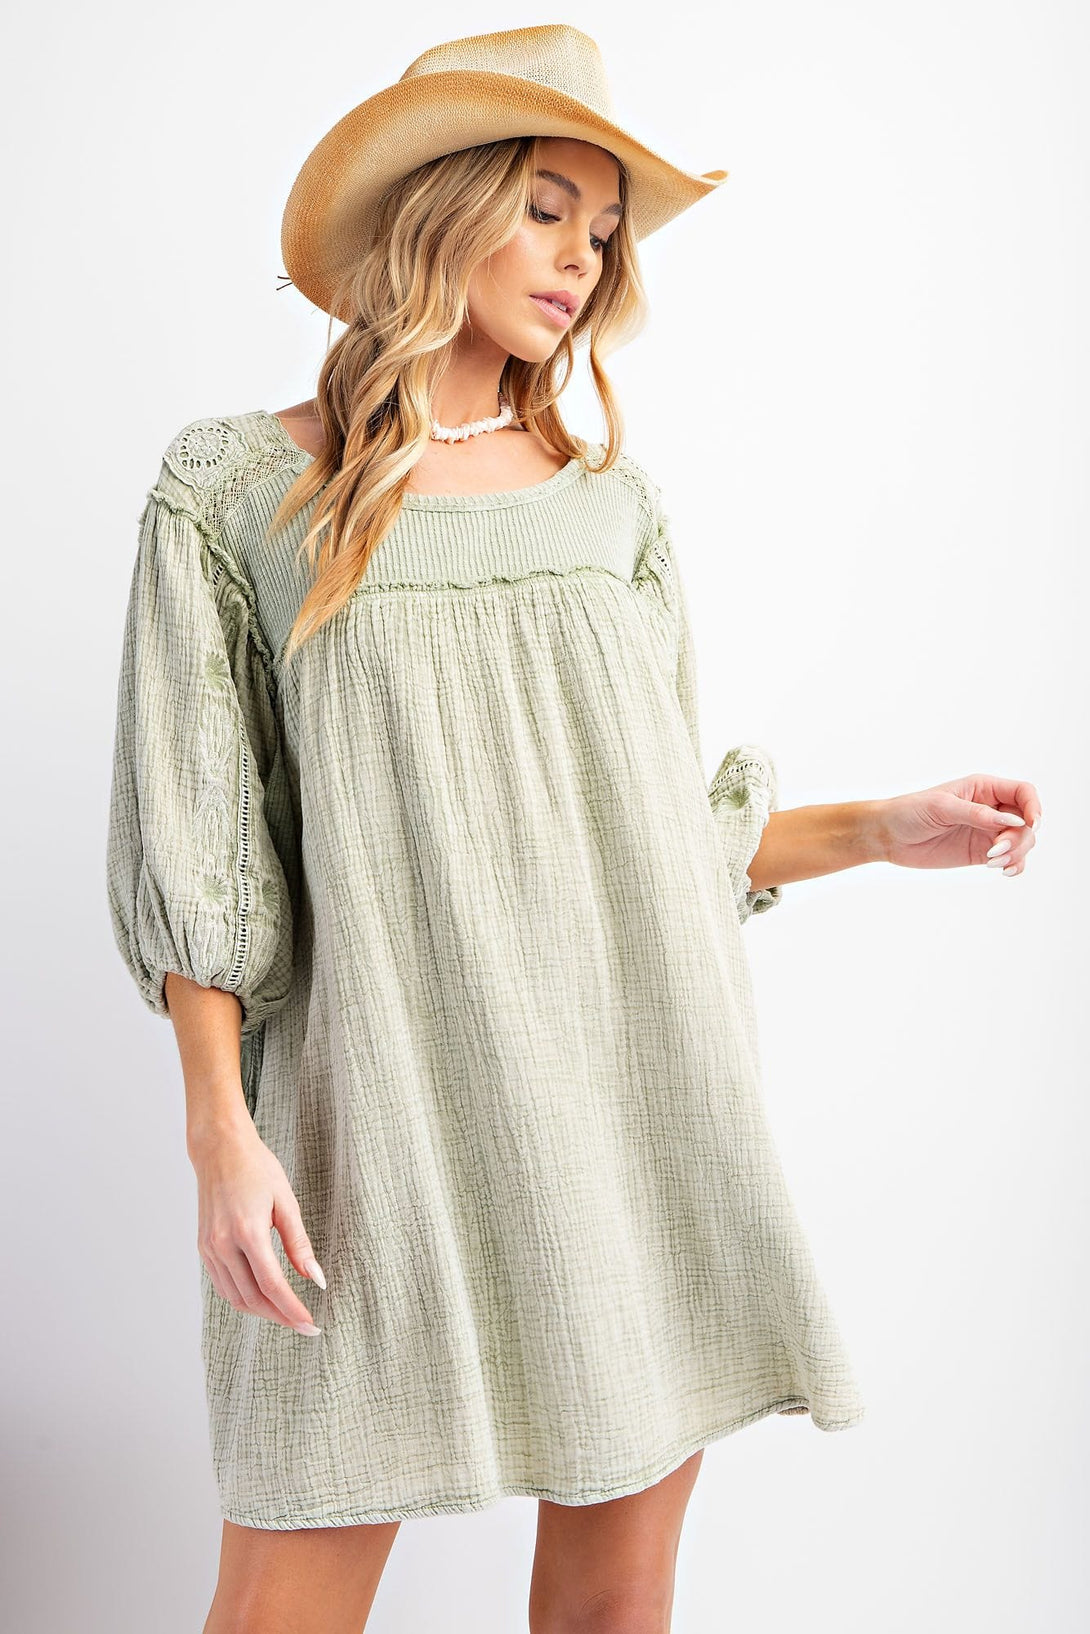 Easel Mineral Washed Cotton Gauze Tunic Dress